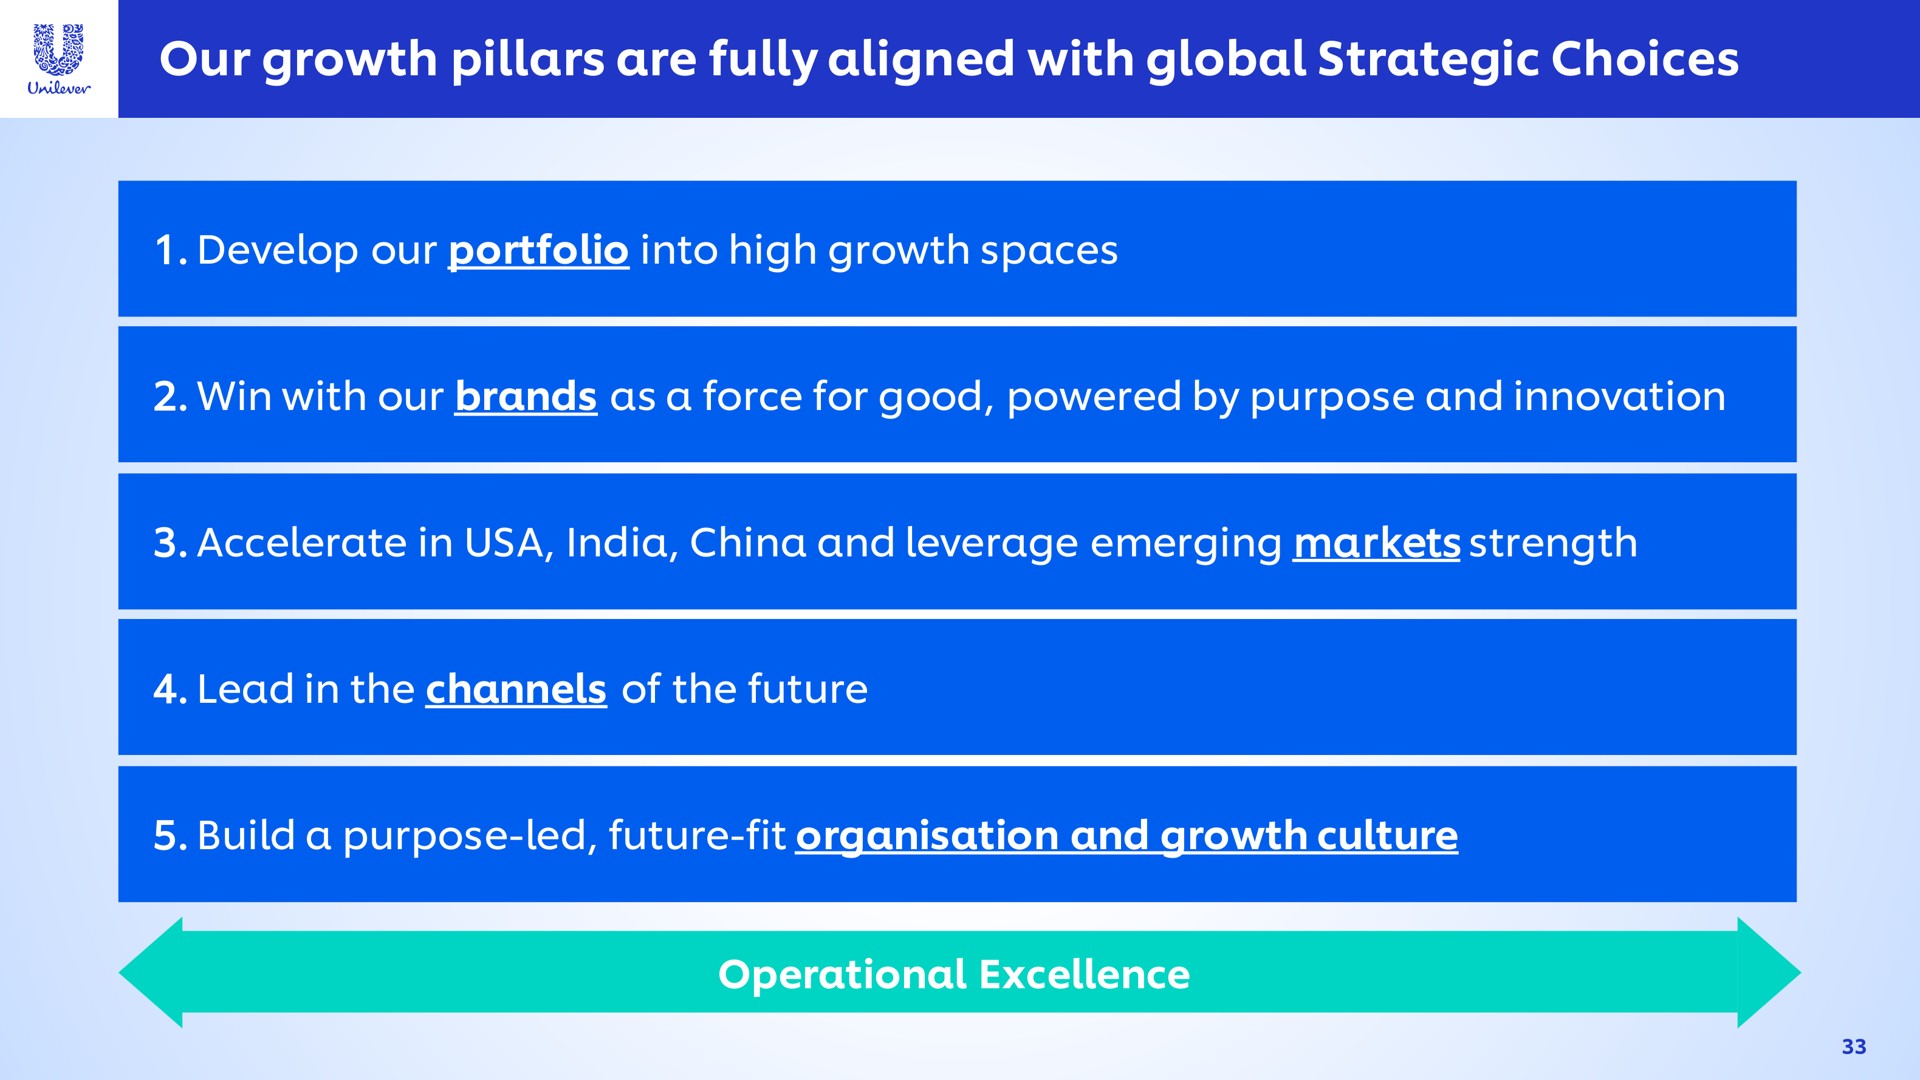 our growth pillars are fully aligned with global strategic choices develop portfolio into high spaces win brands as a force for good powered by purpose and innovation operational excellence build a purpose led future fit and culture | Unilever